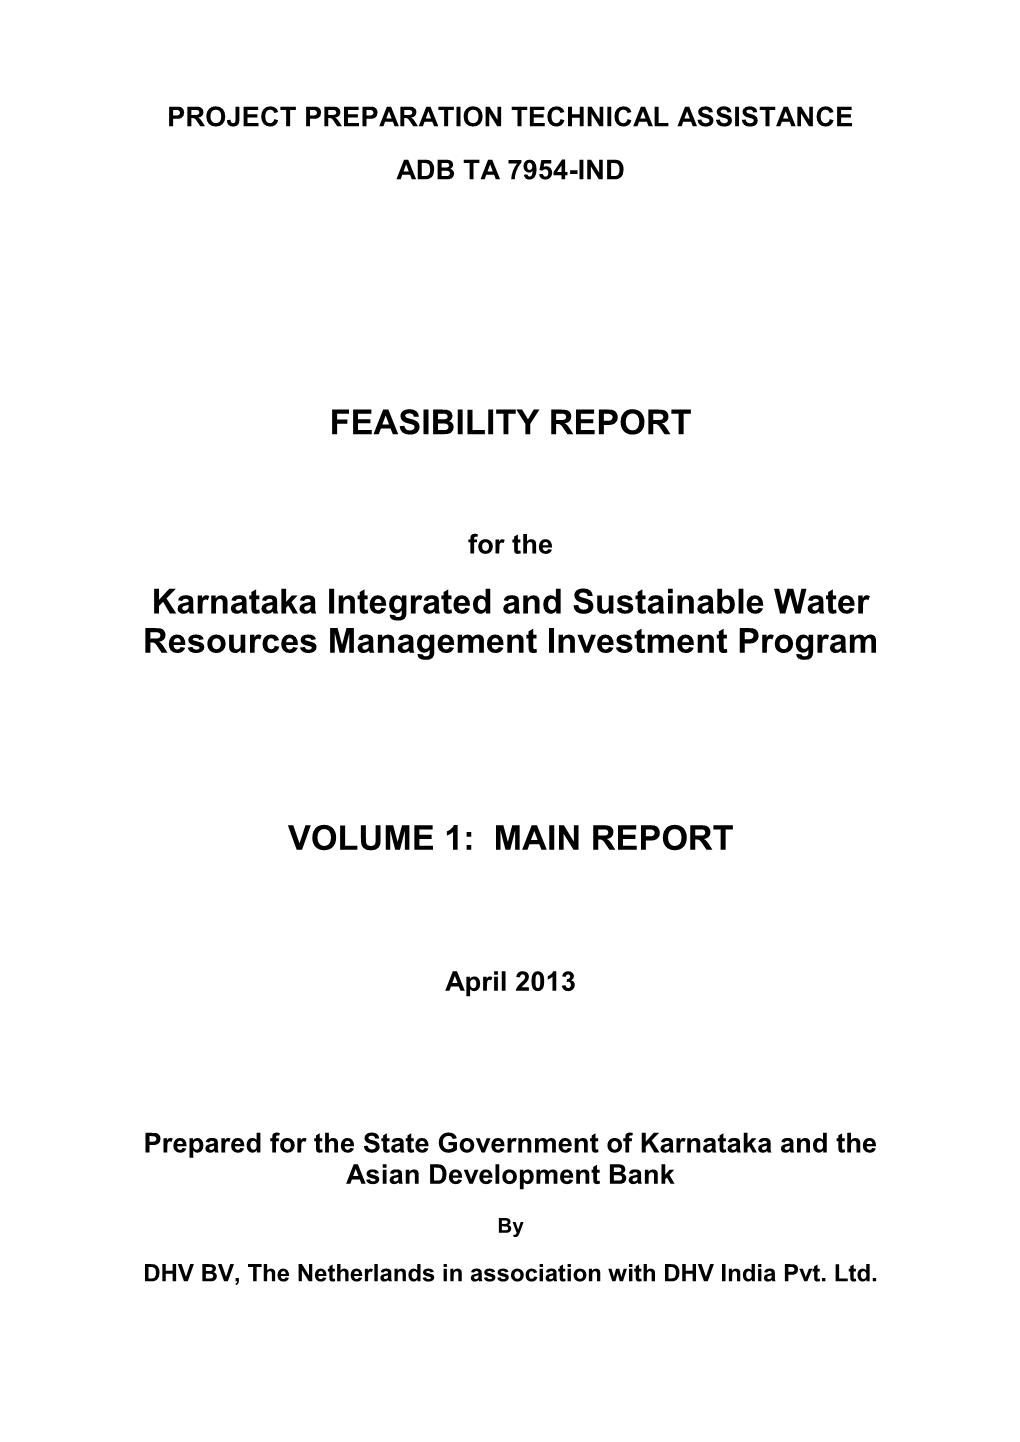 Feasibility Report for the Karnataka Integrated and Sustainable Water Resources Management Investment Program